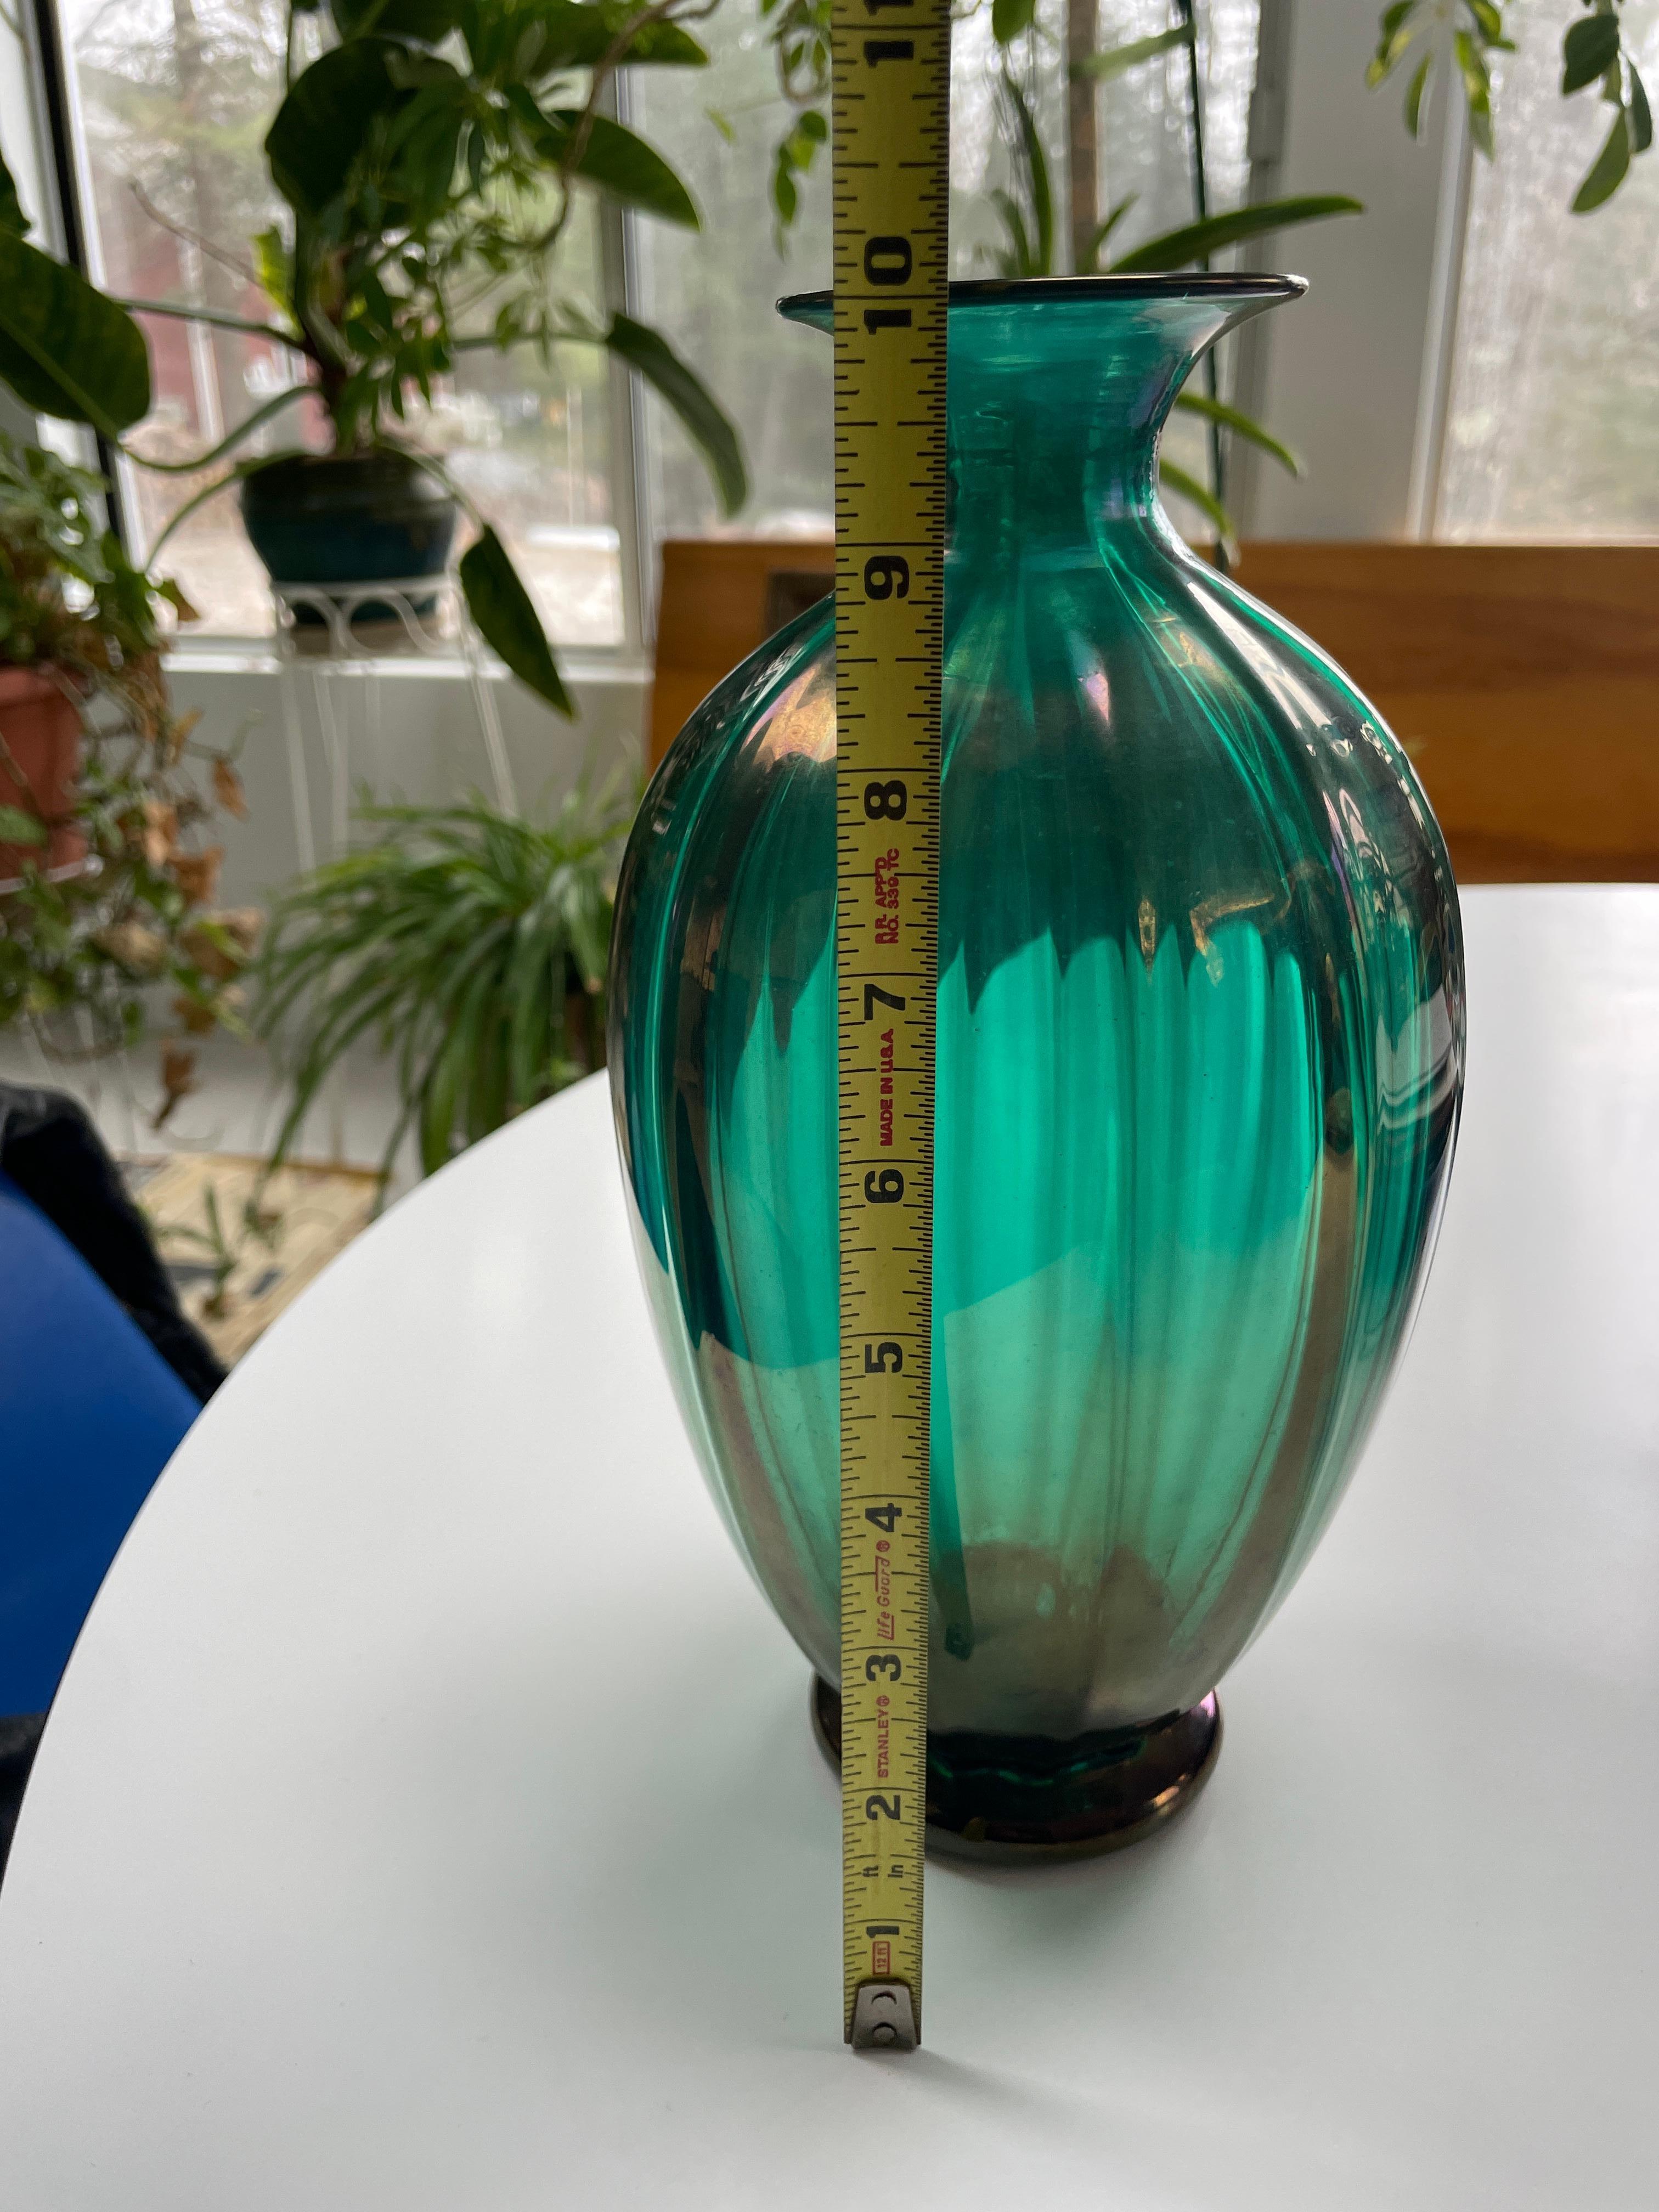 Archimede Seguso Vase, Green Glass with Iridescence, Serenella Signed  For Sale 1